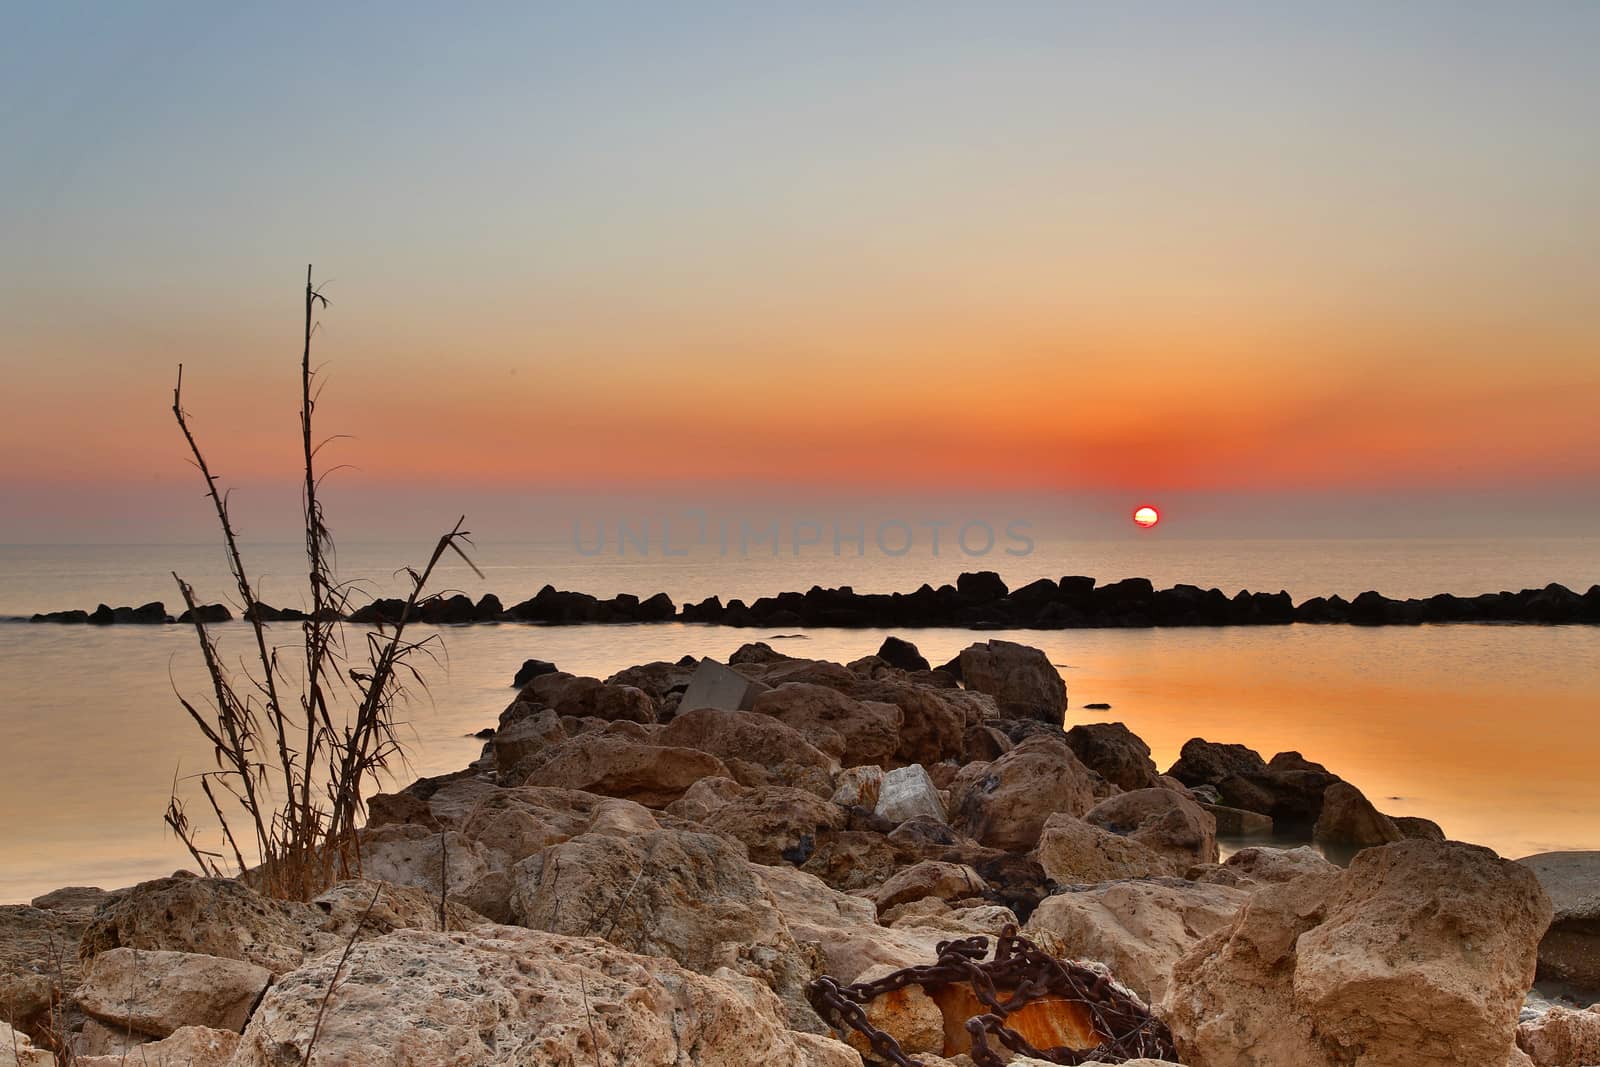 Sunrise over the Adriatic Sea, Italy.
The rising sun touches the rocks and creates a nice reflection on the water.